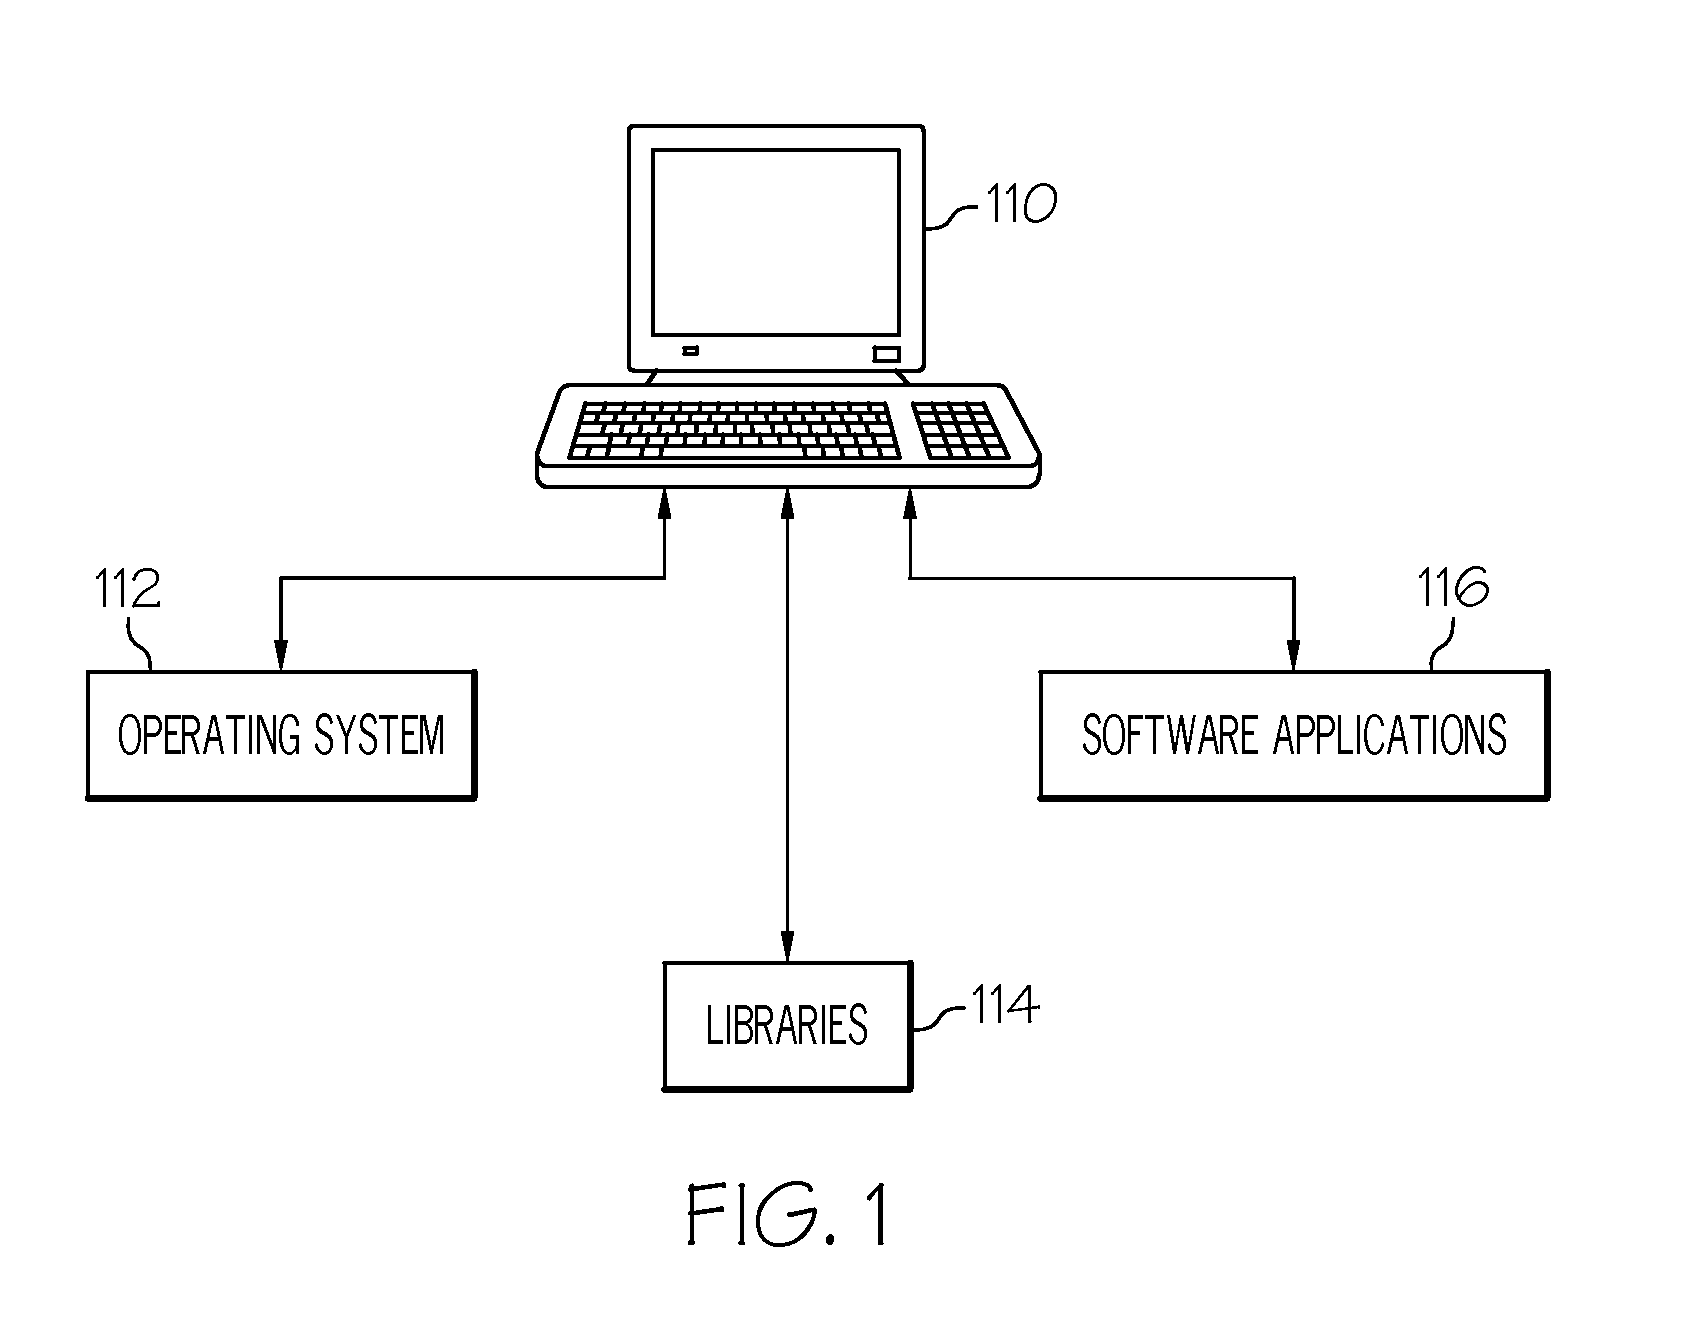 Method of reinstalling a computer based on frequency of application utilization